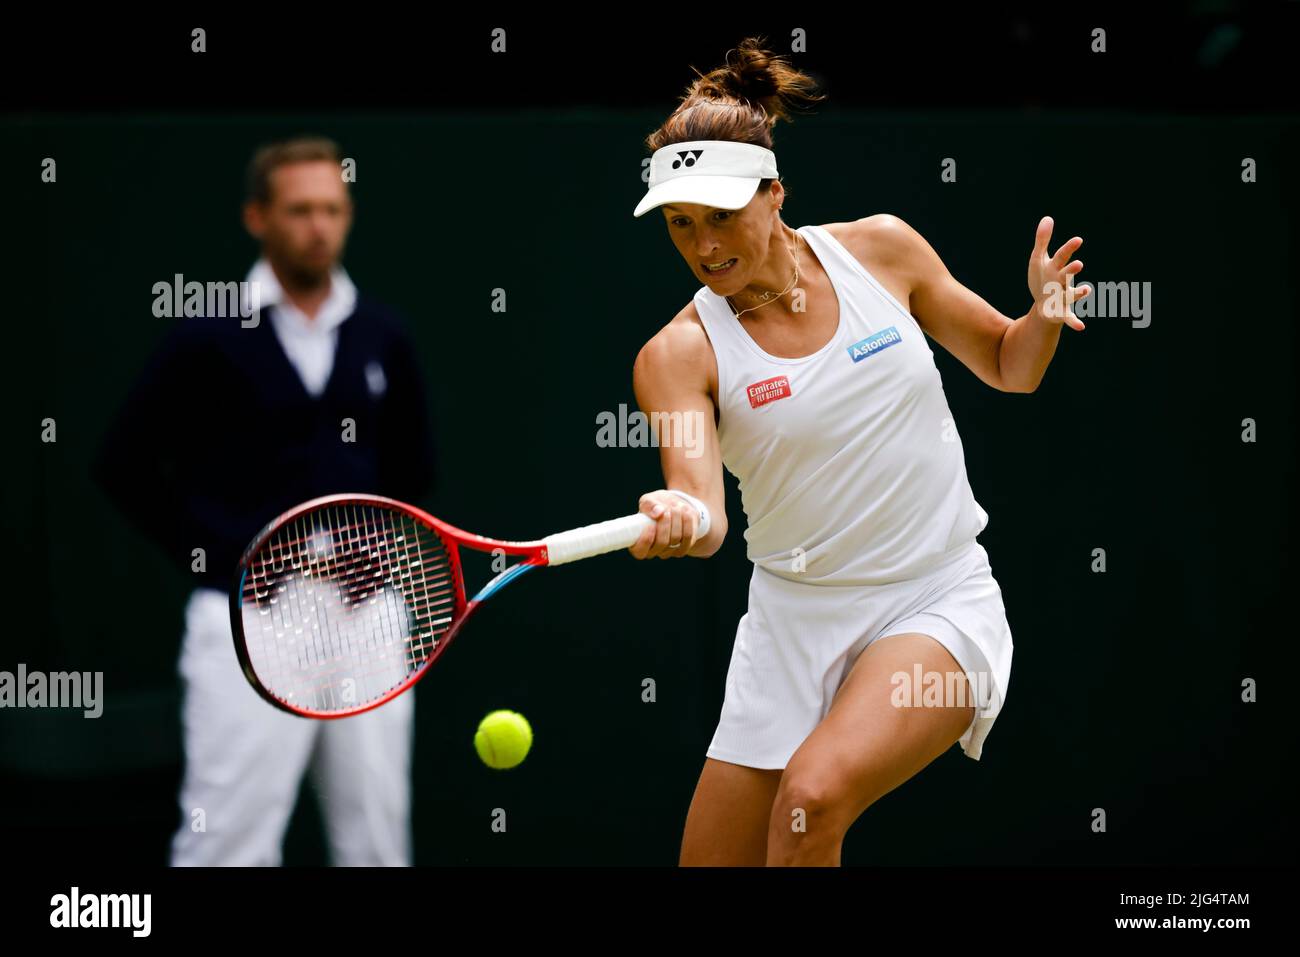 London, UK, 7th July 2022 Tennis player Tatjana Maria from Germany is in action during the women´s semifinal match at the All England Lawn Tennis and Croquet Club in London